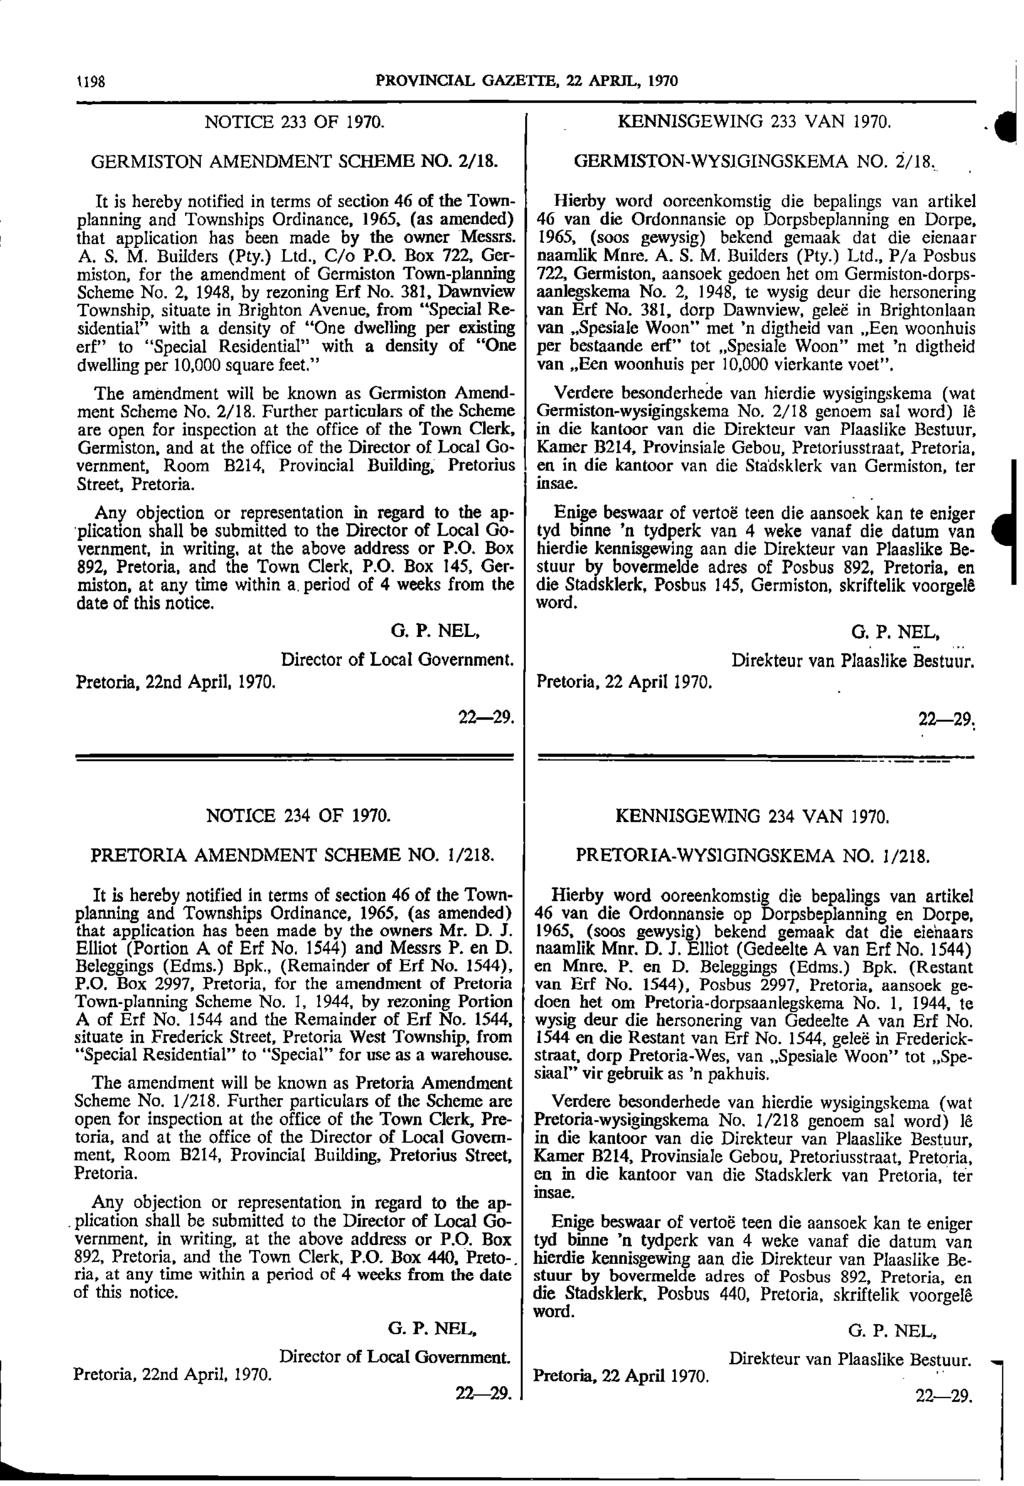 1198 PROVINCIAL GAZETTE 22 APRIL 1970 NOTICE 233 OF 1970 KENNISGEWING 233 VAN 1970 GERMISTON AMENDMENT SCHEME NO 2/18 GERMISTON WYSIGINGSKEMA NO 2/18 It is hereby notified in terms of section 46 of